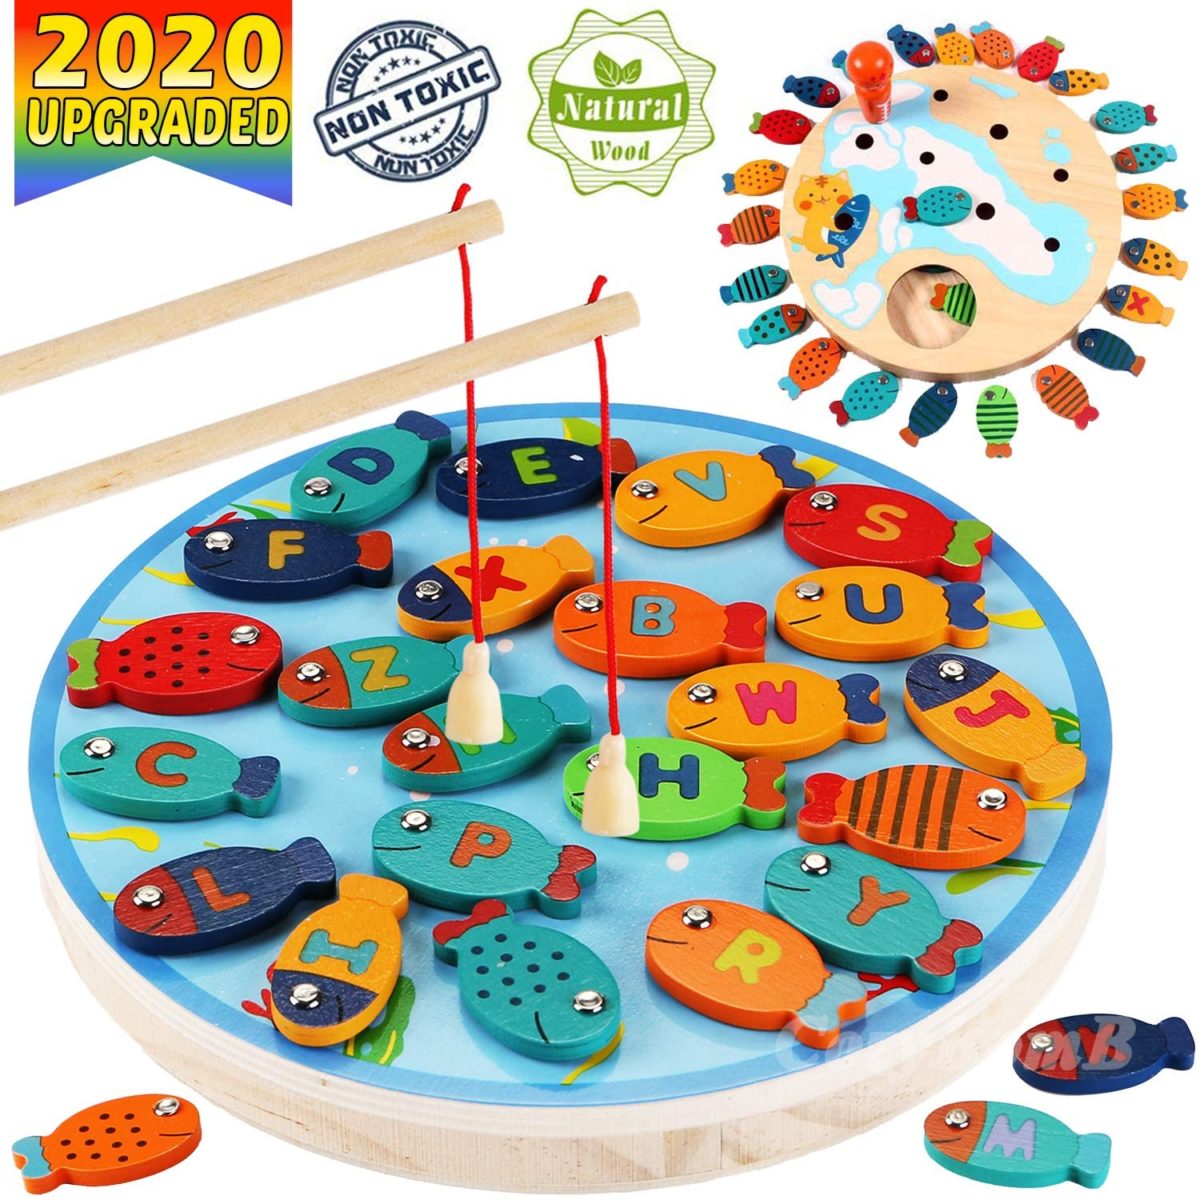 learning, creating, excitement, oh my! here are 32 of the best educational toys | 32 toys that are the best of both worlds, educational and fun!